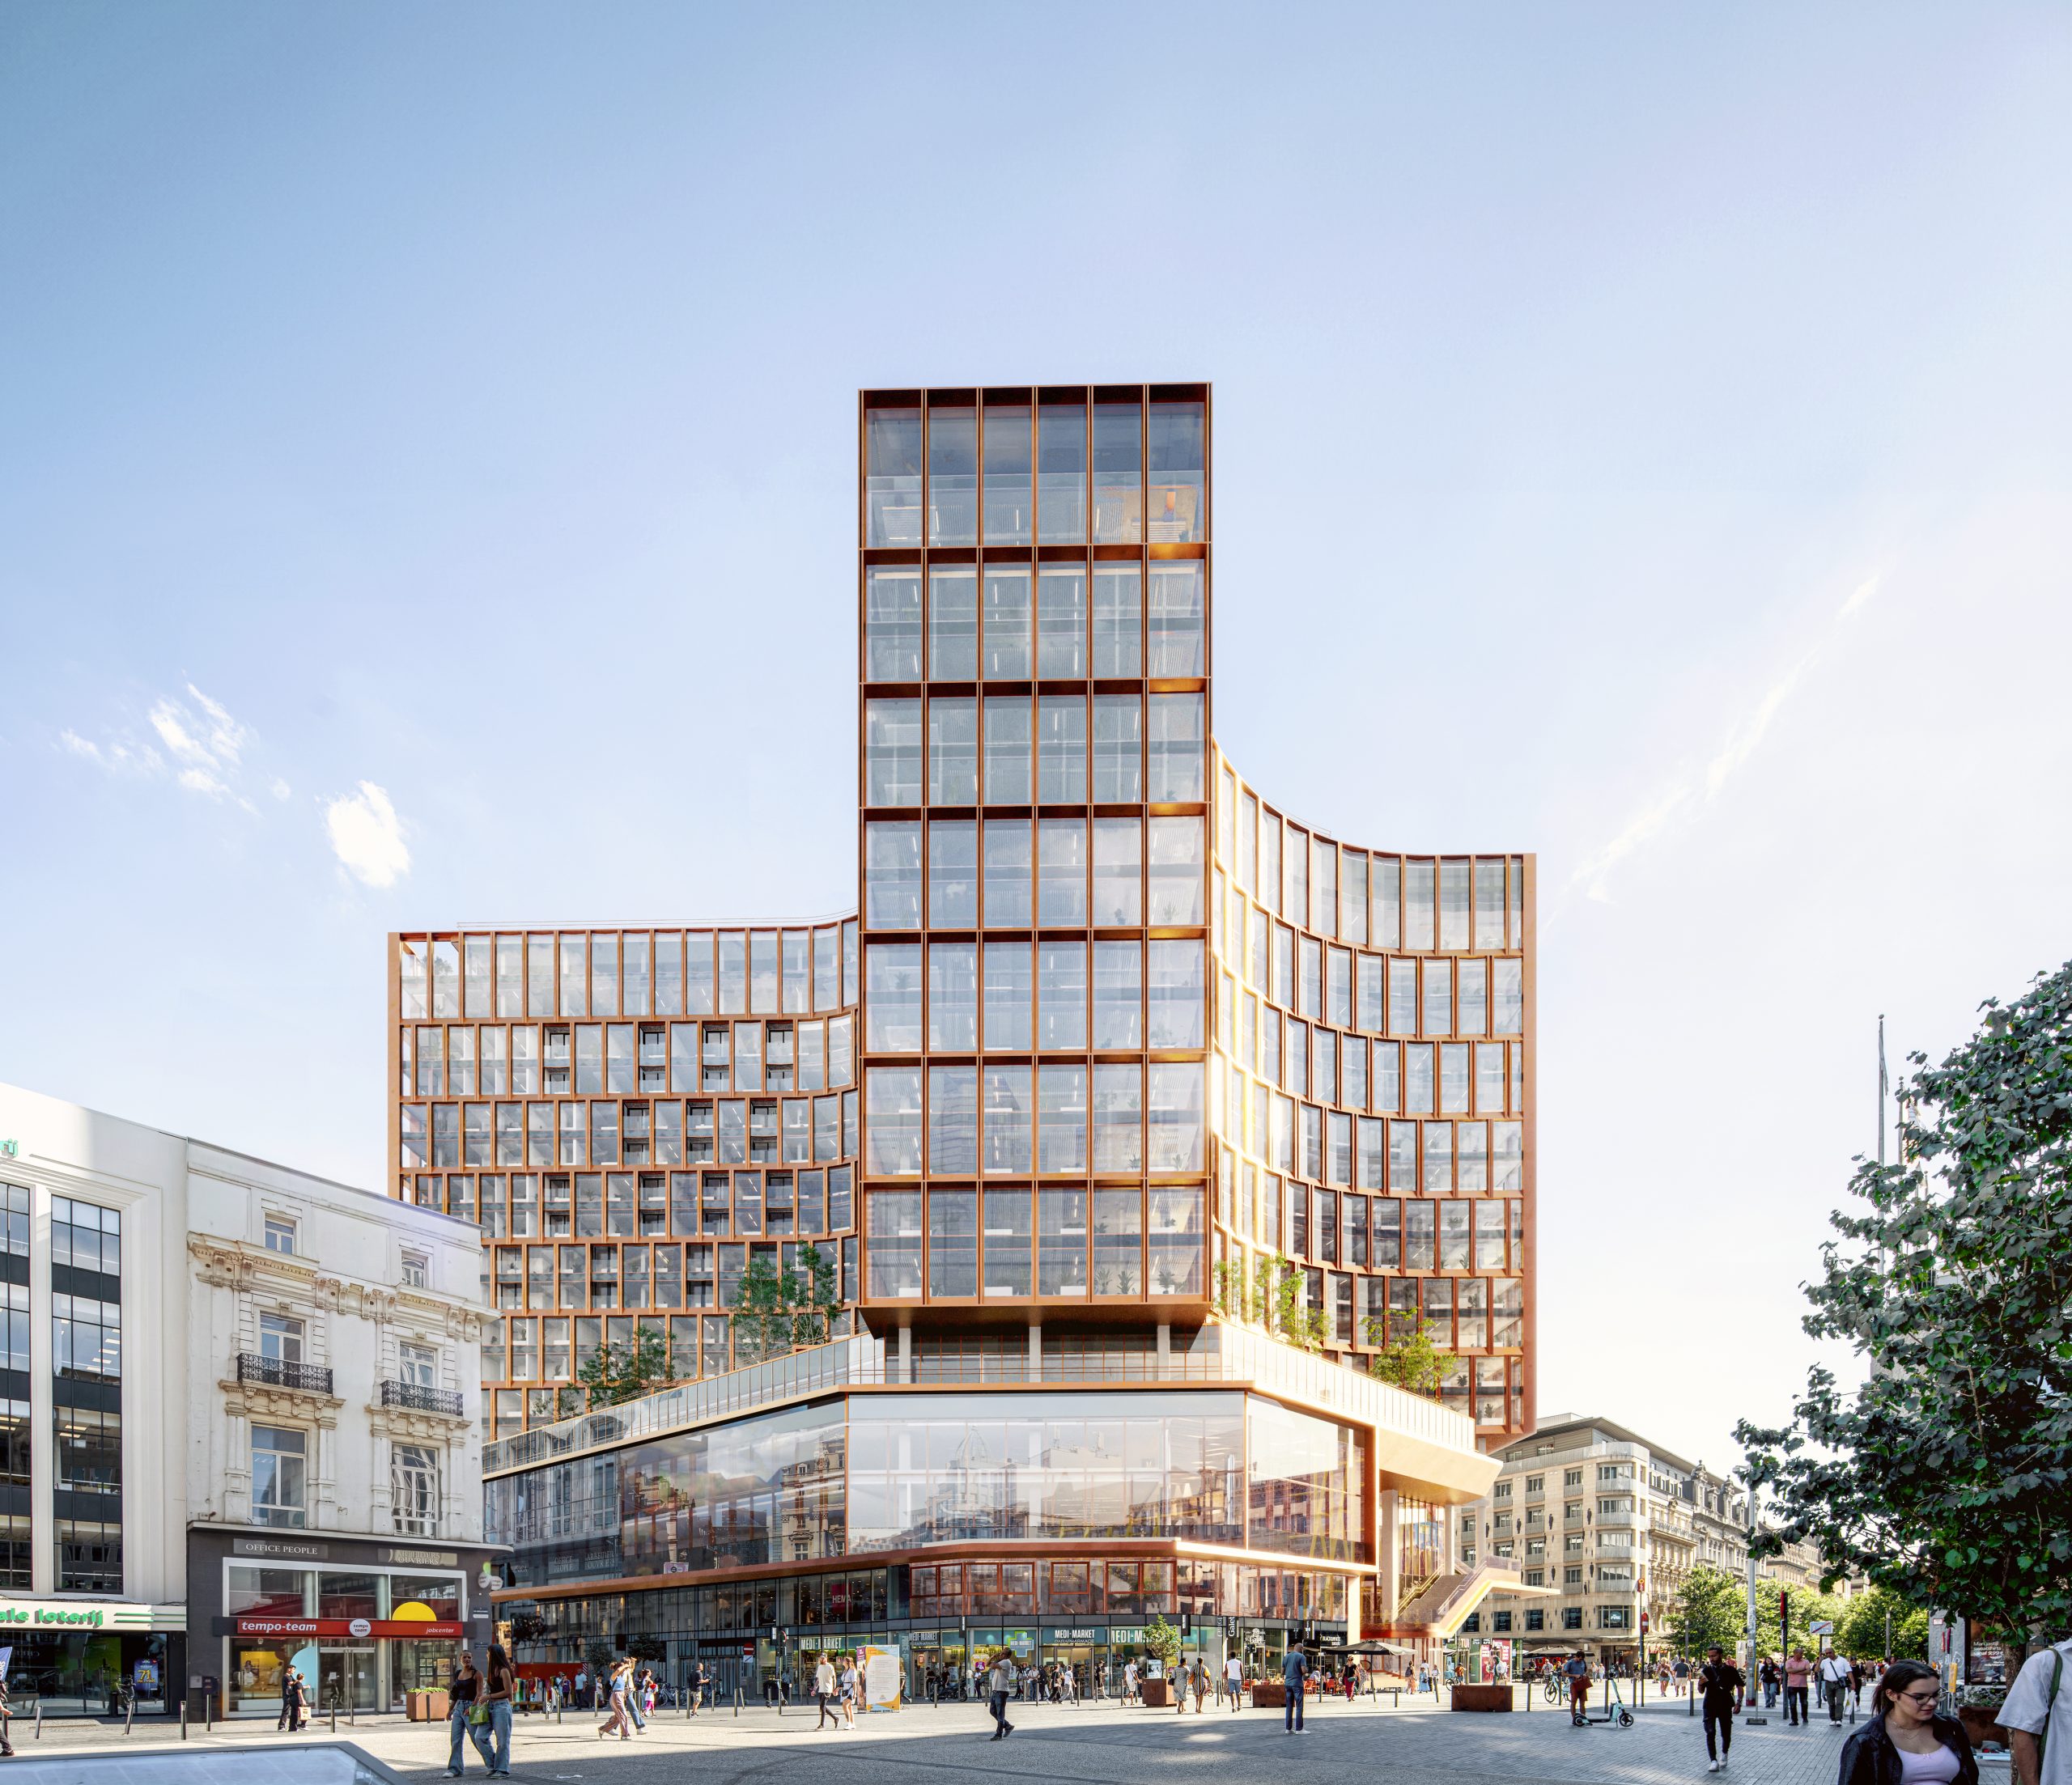 image - EXTENSIVE RENOVATION OF ICONIC MODERNIST BUILDING IN THE HEART OF BRUSSELS STARTED